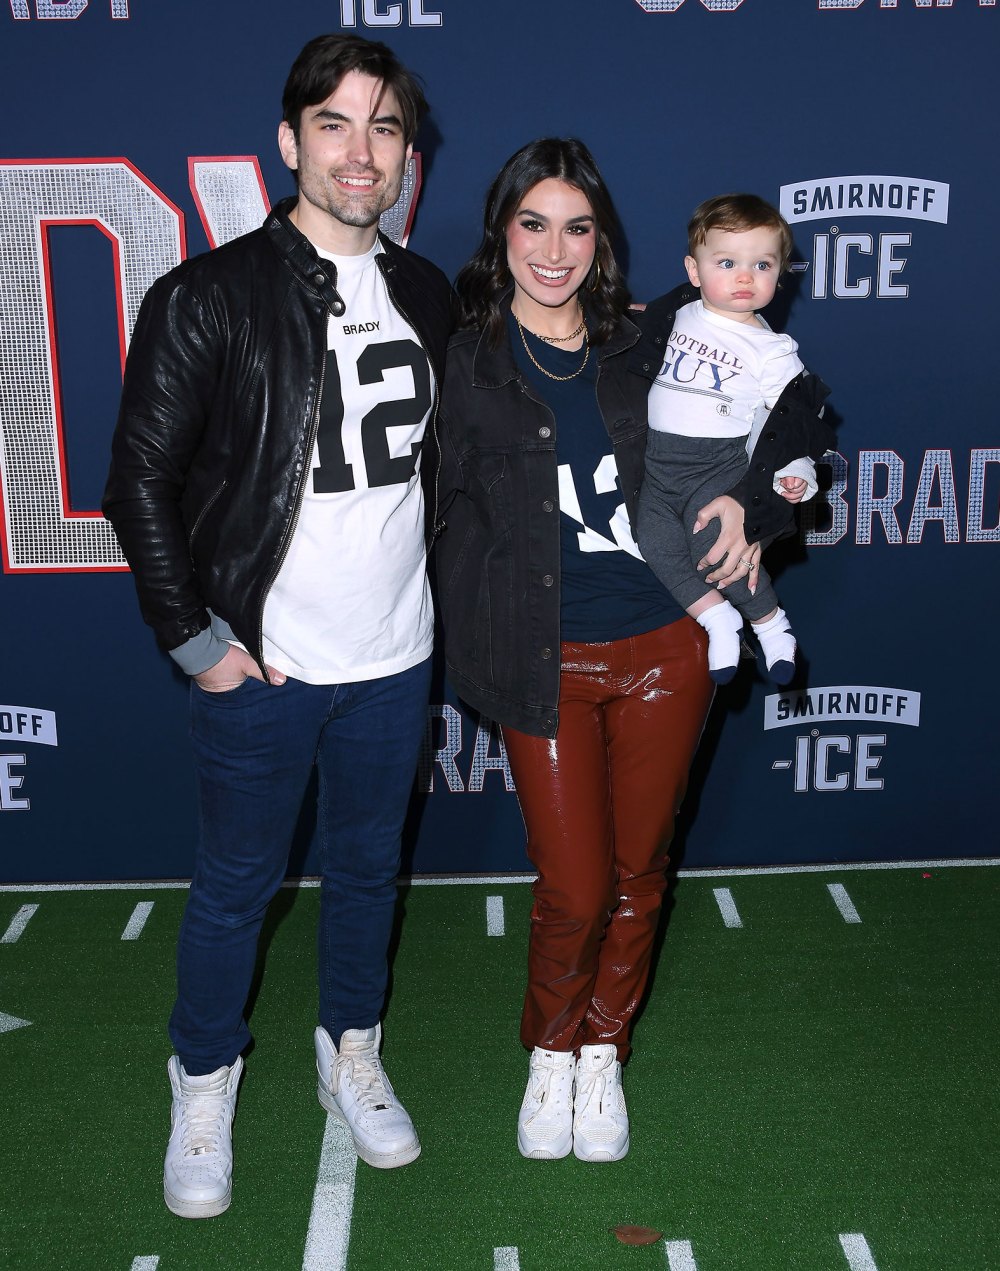 Bachelor Nation Ashley Iaconetti and Jared Haibon Confirm Trying For Another Baby